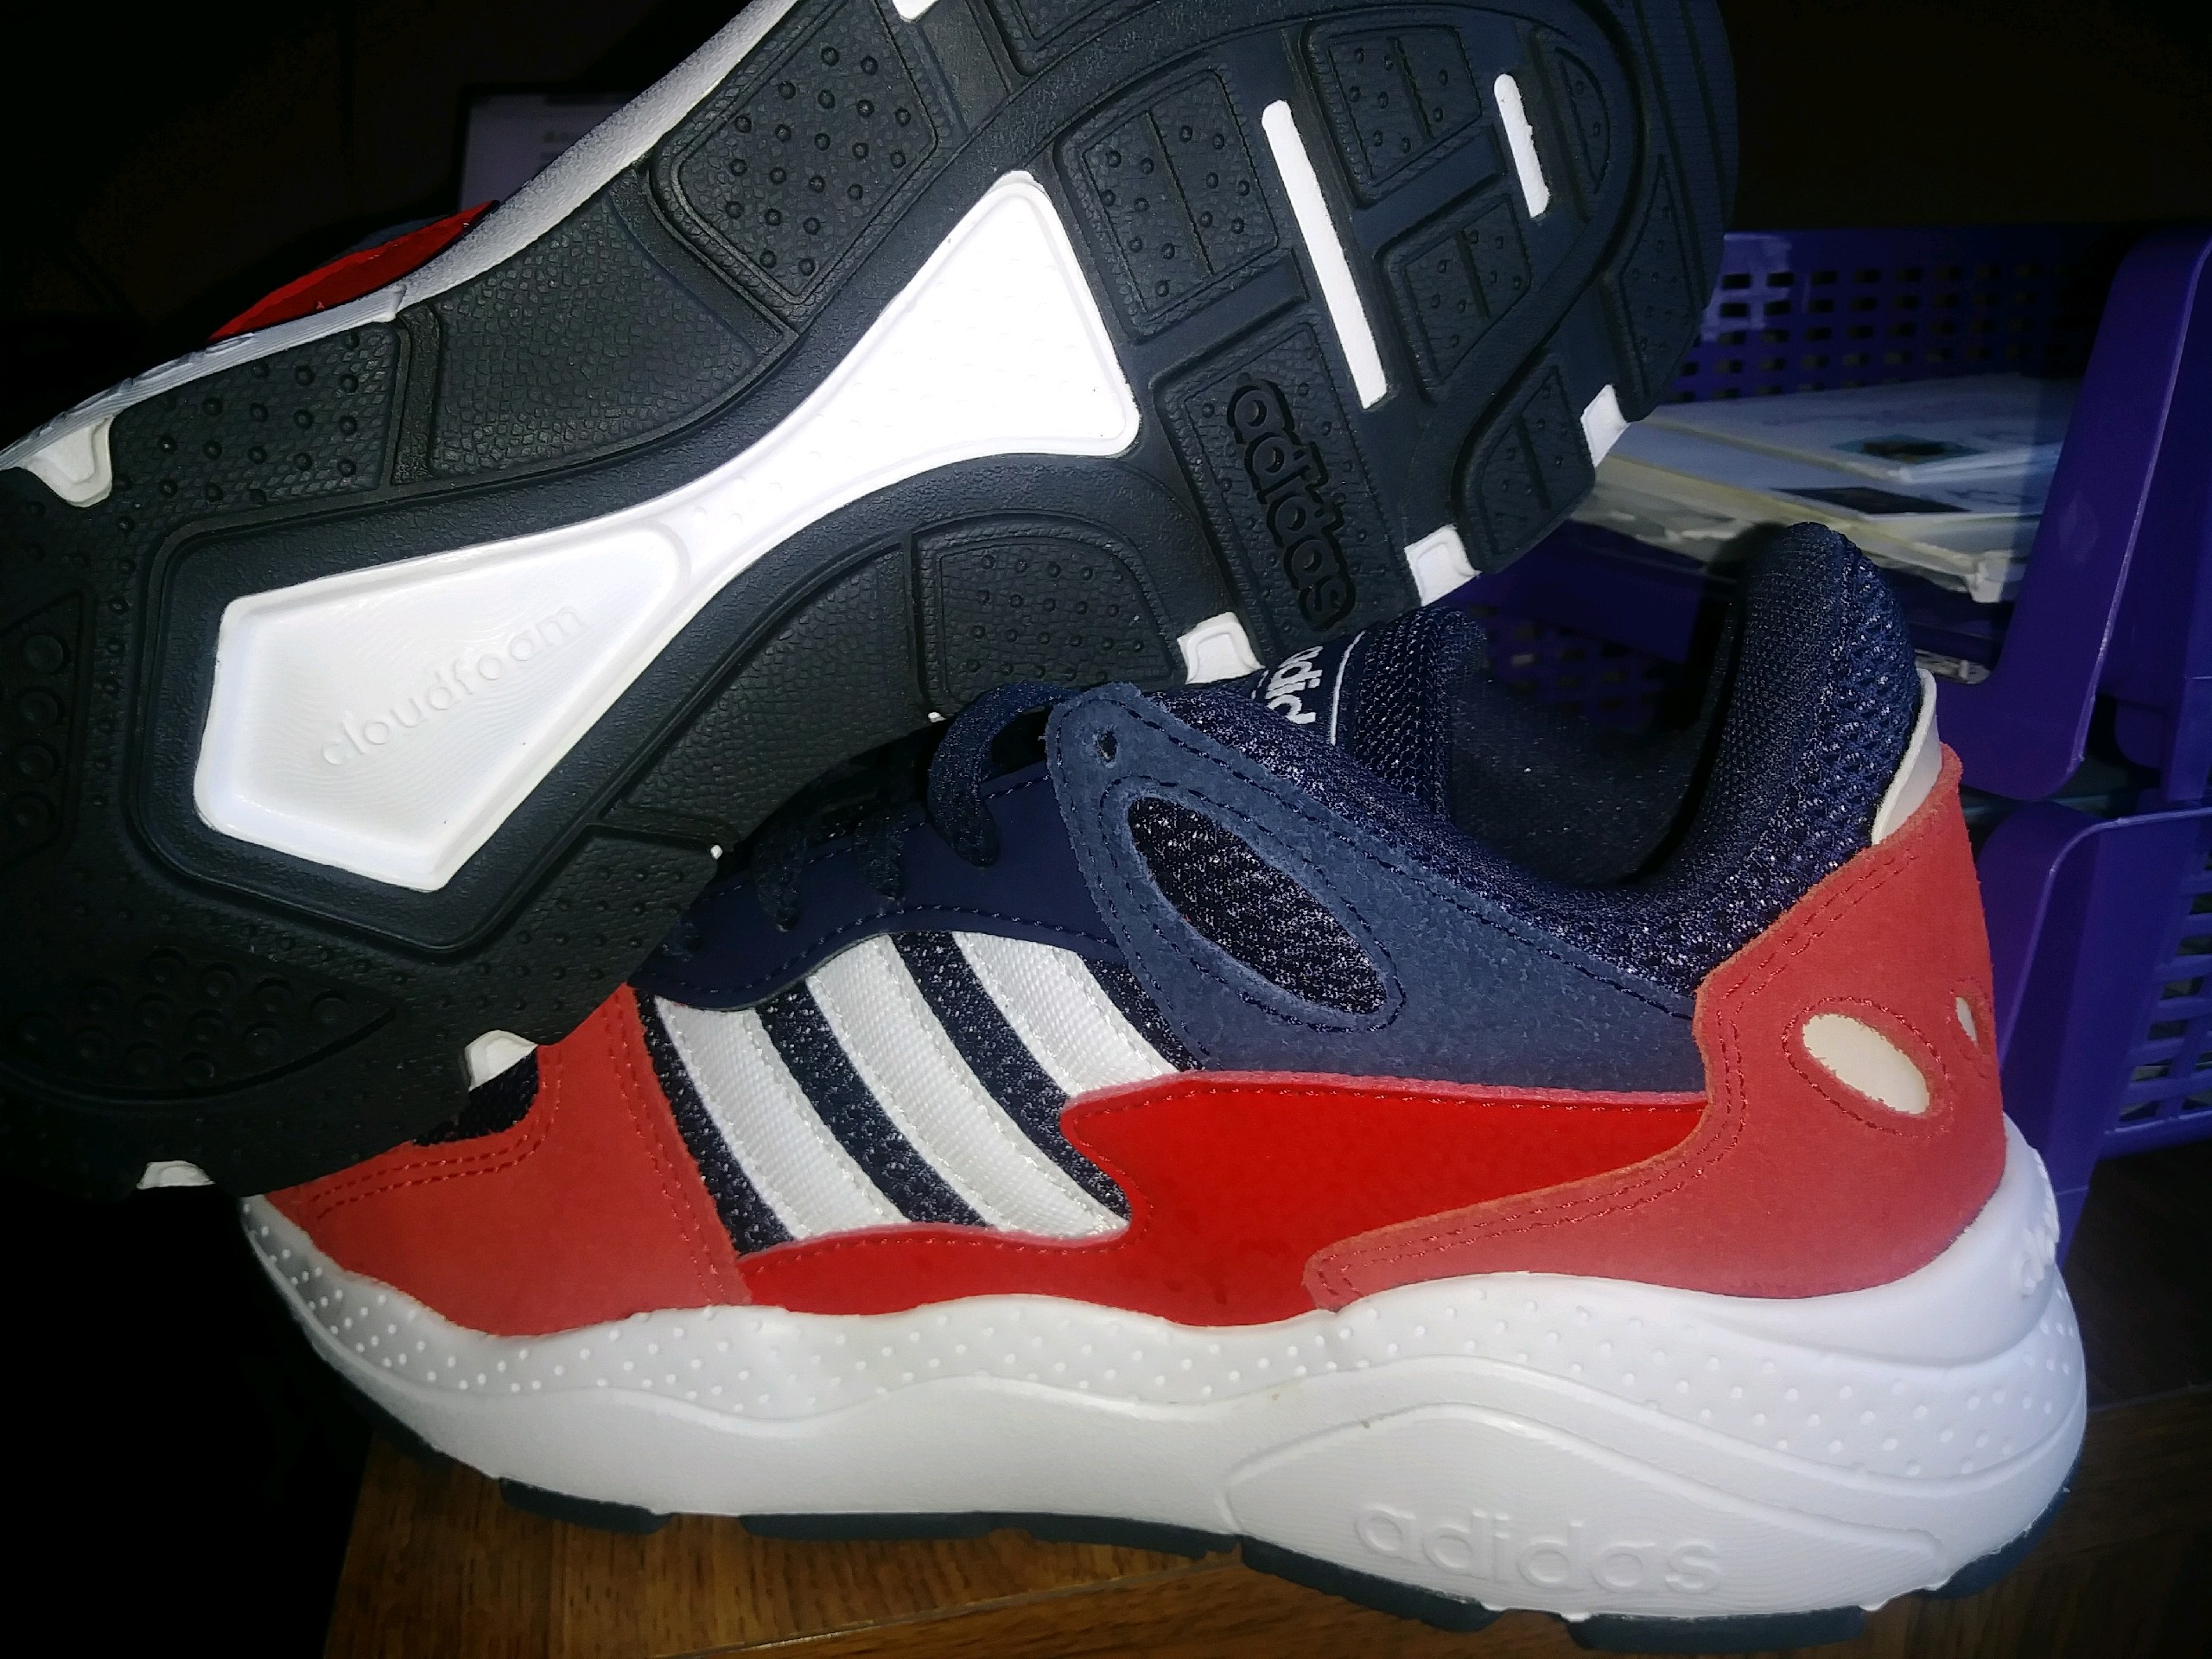 Boys Adidas, 5 1/2, Shoes in Fayetteville, TN - Exchange931.com